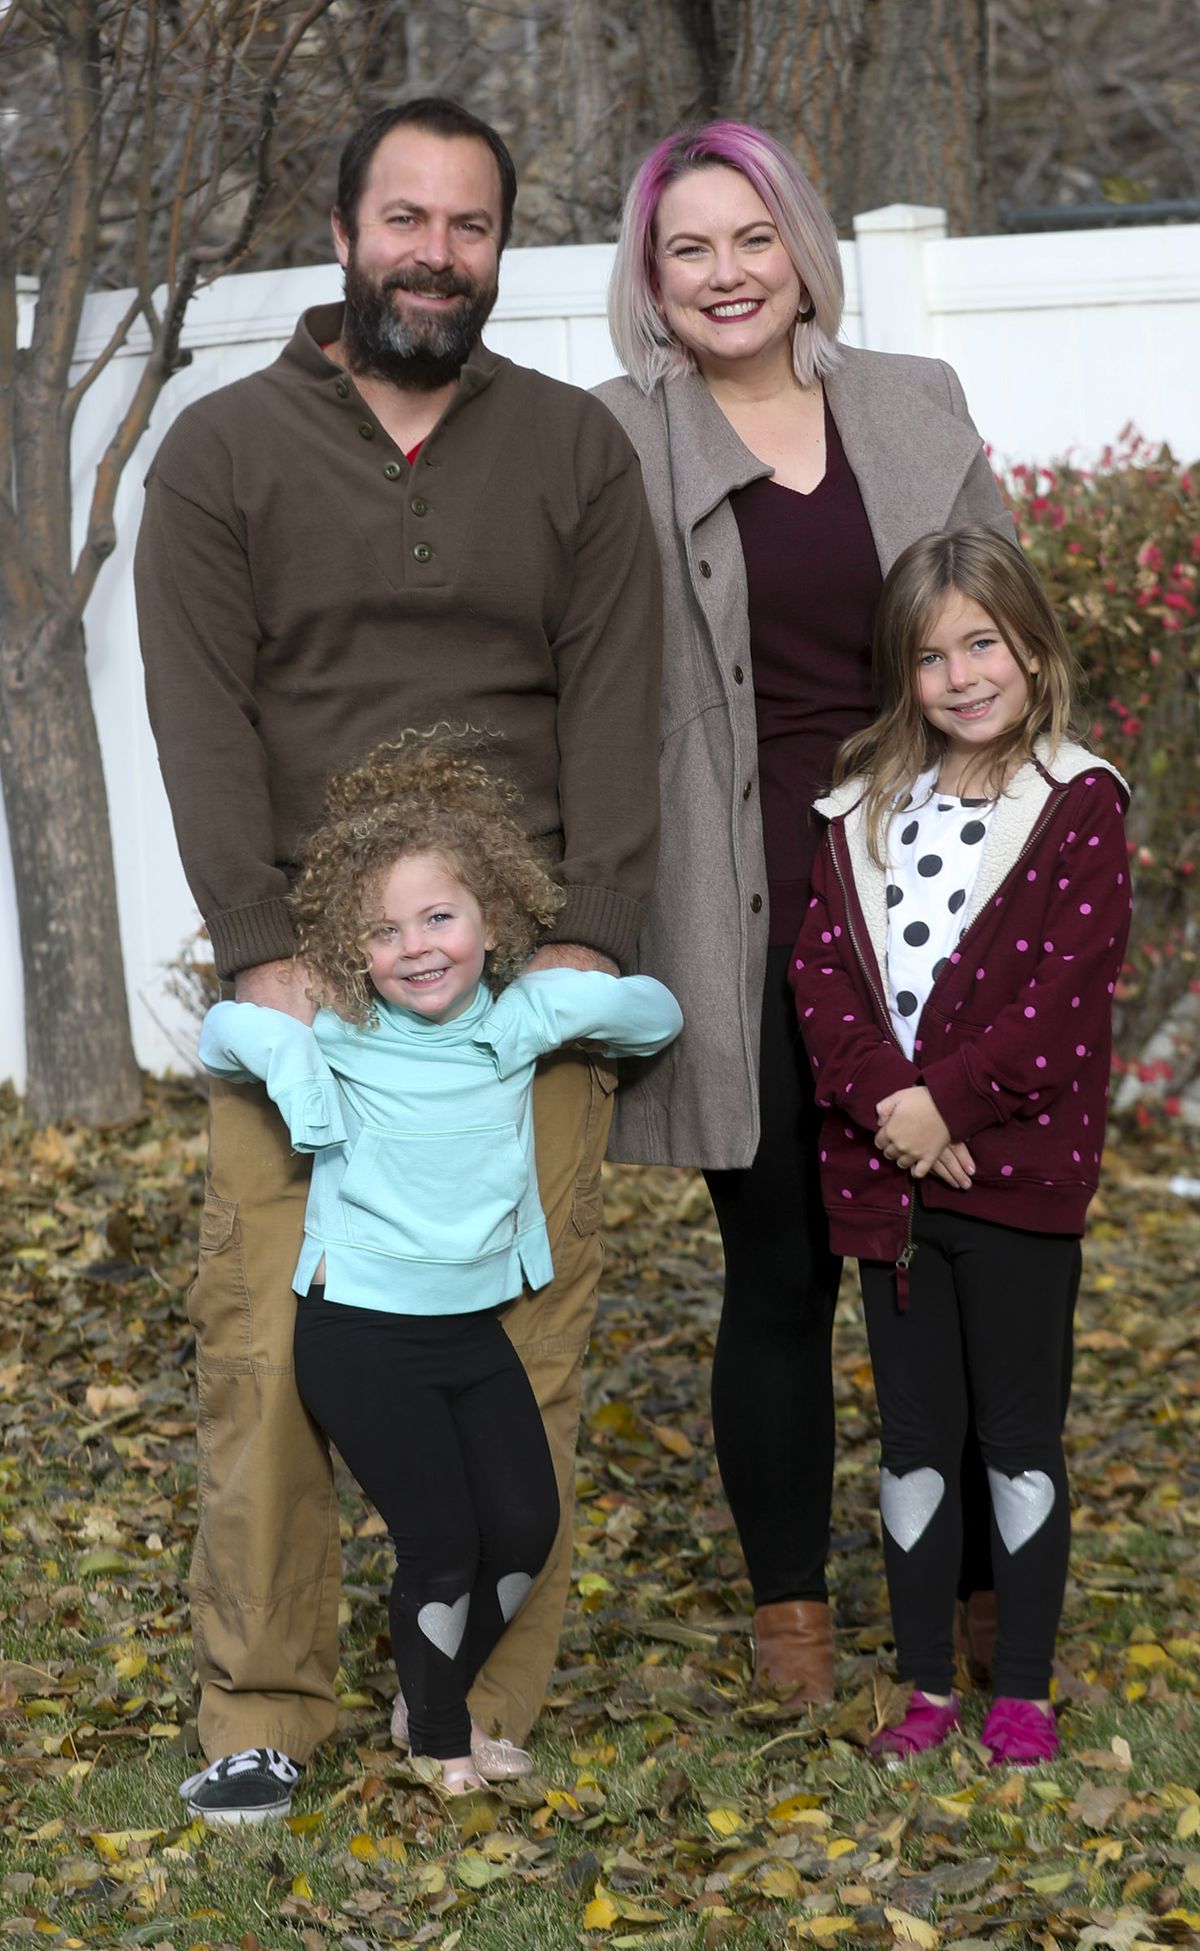 John Hepworth, back left, and his wife, Jen, back right, pose for a photo with daughters Sadie, front left, and Penny, front right, in the backyard of their home in Layton on Tuesday, Nov. 10, 2020.